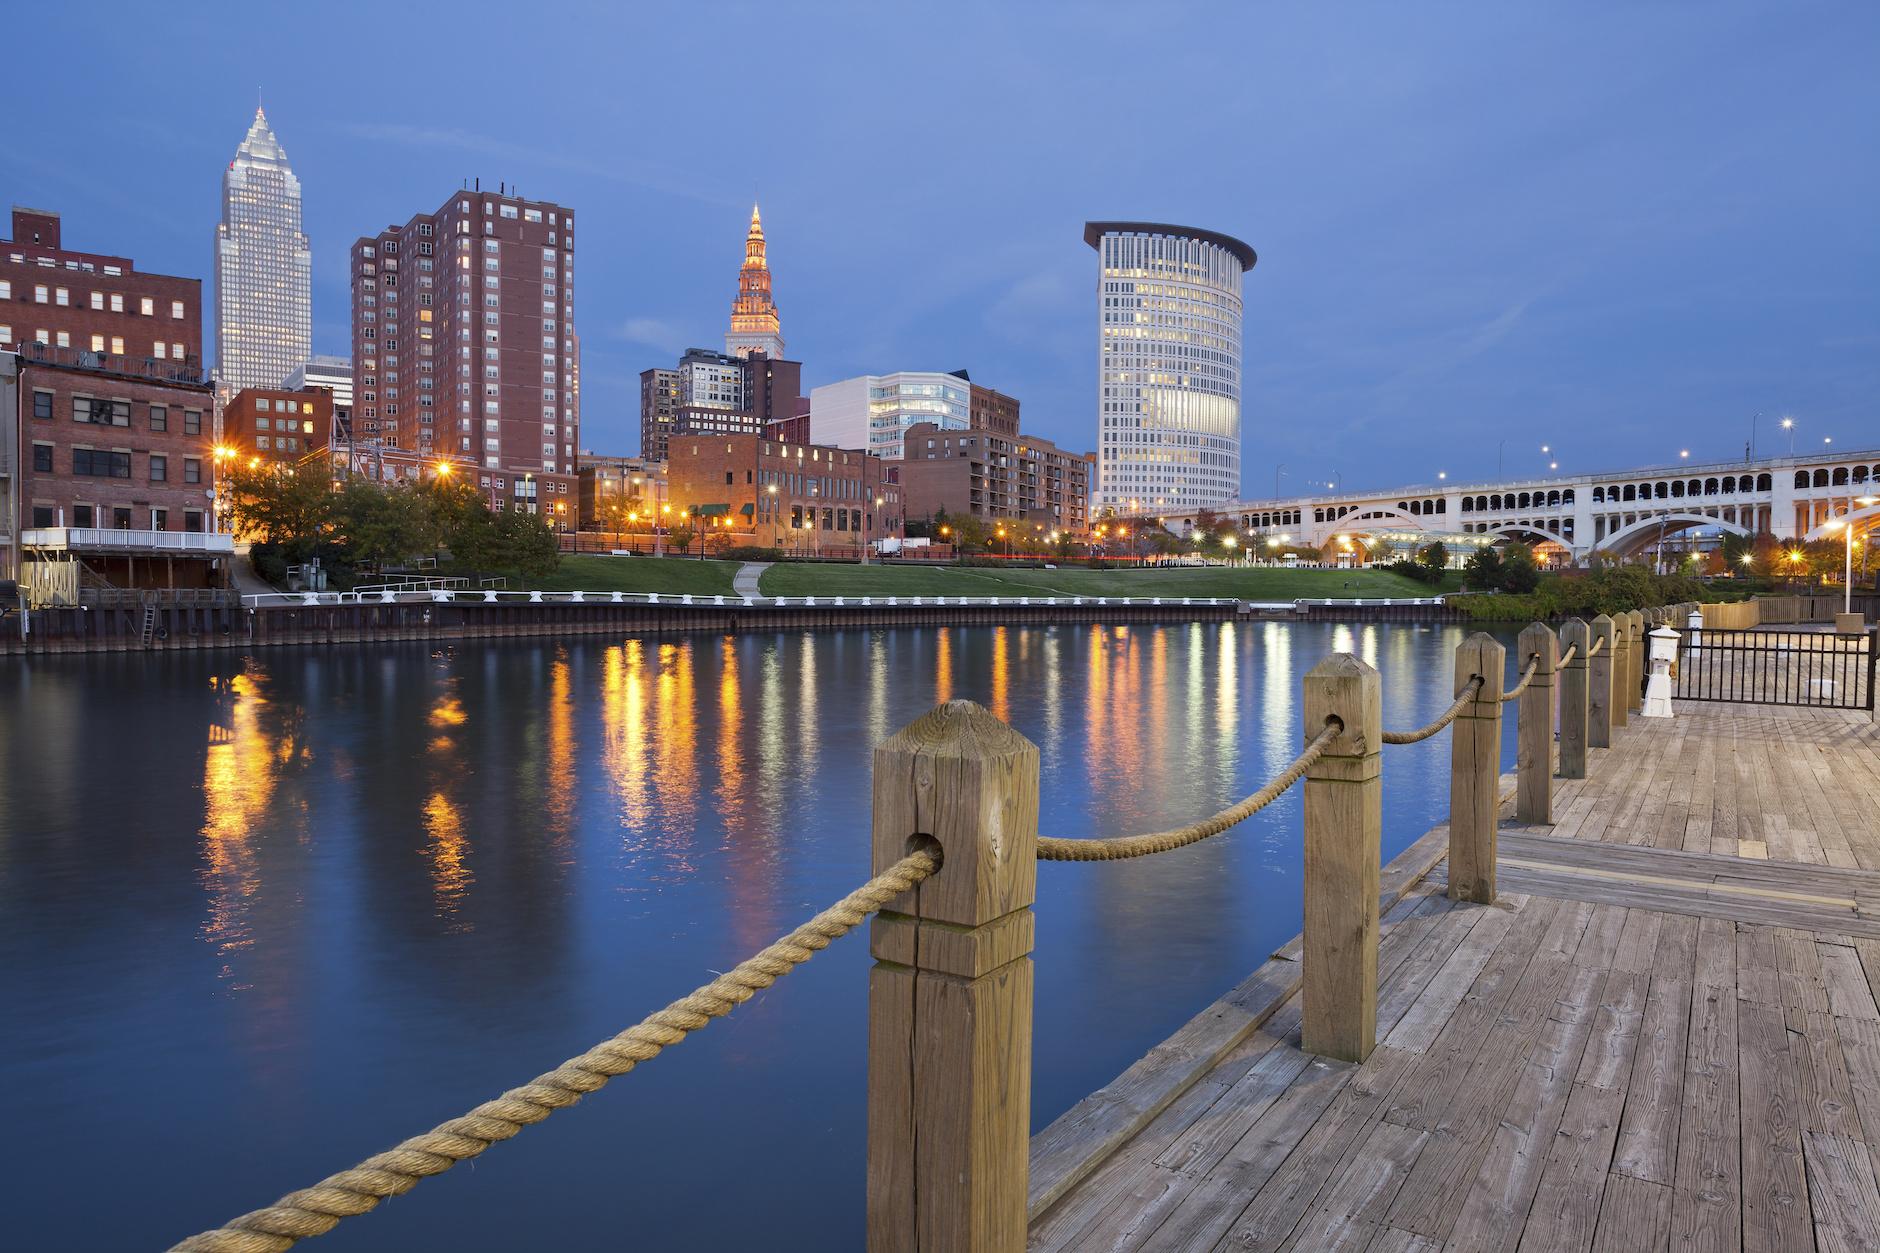 Top 10 Things to Do on a Budget in Cleveland